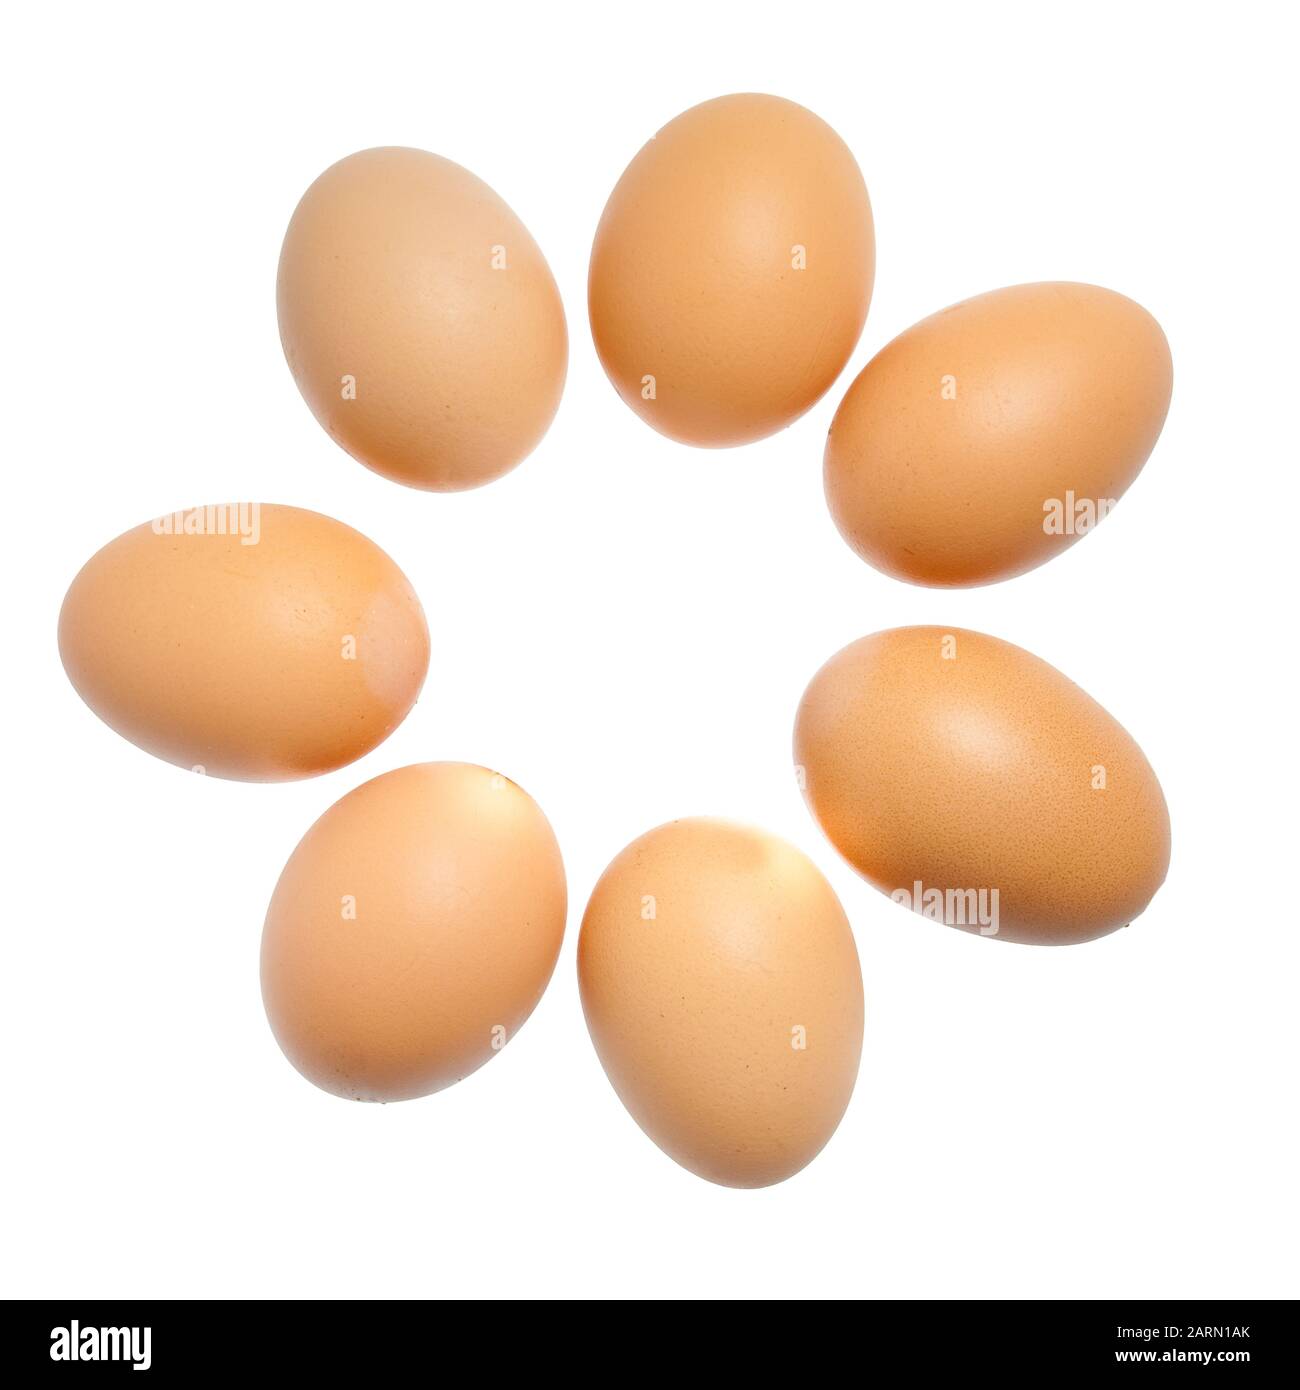 7 eggs on a white backgrounds Stock Photo